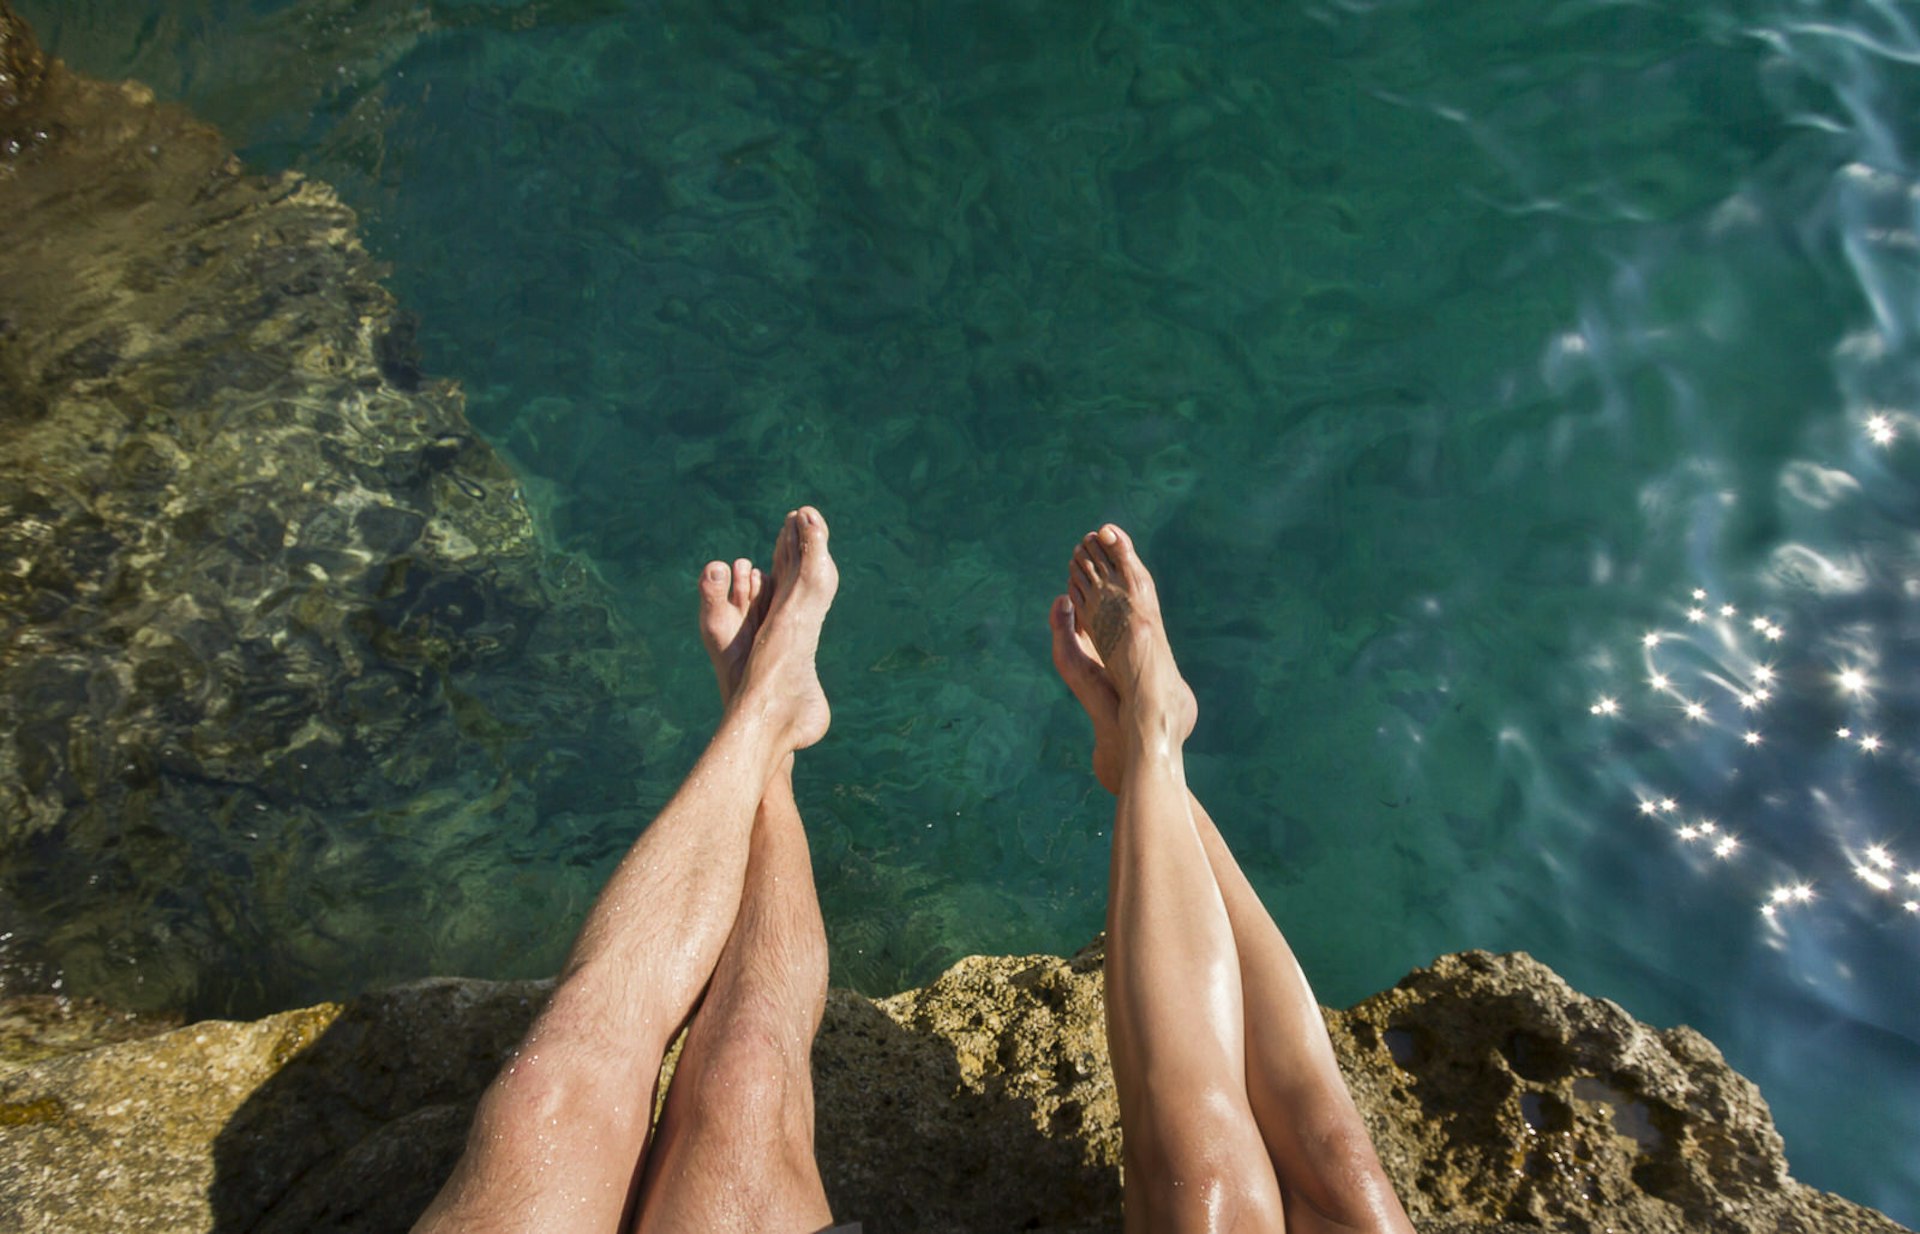 A view from above of two people's legs over a rock face with the sea below